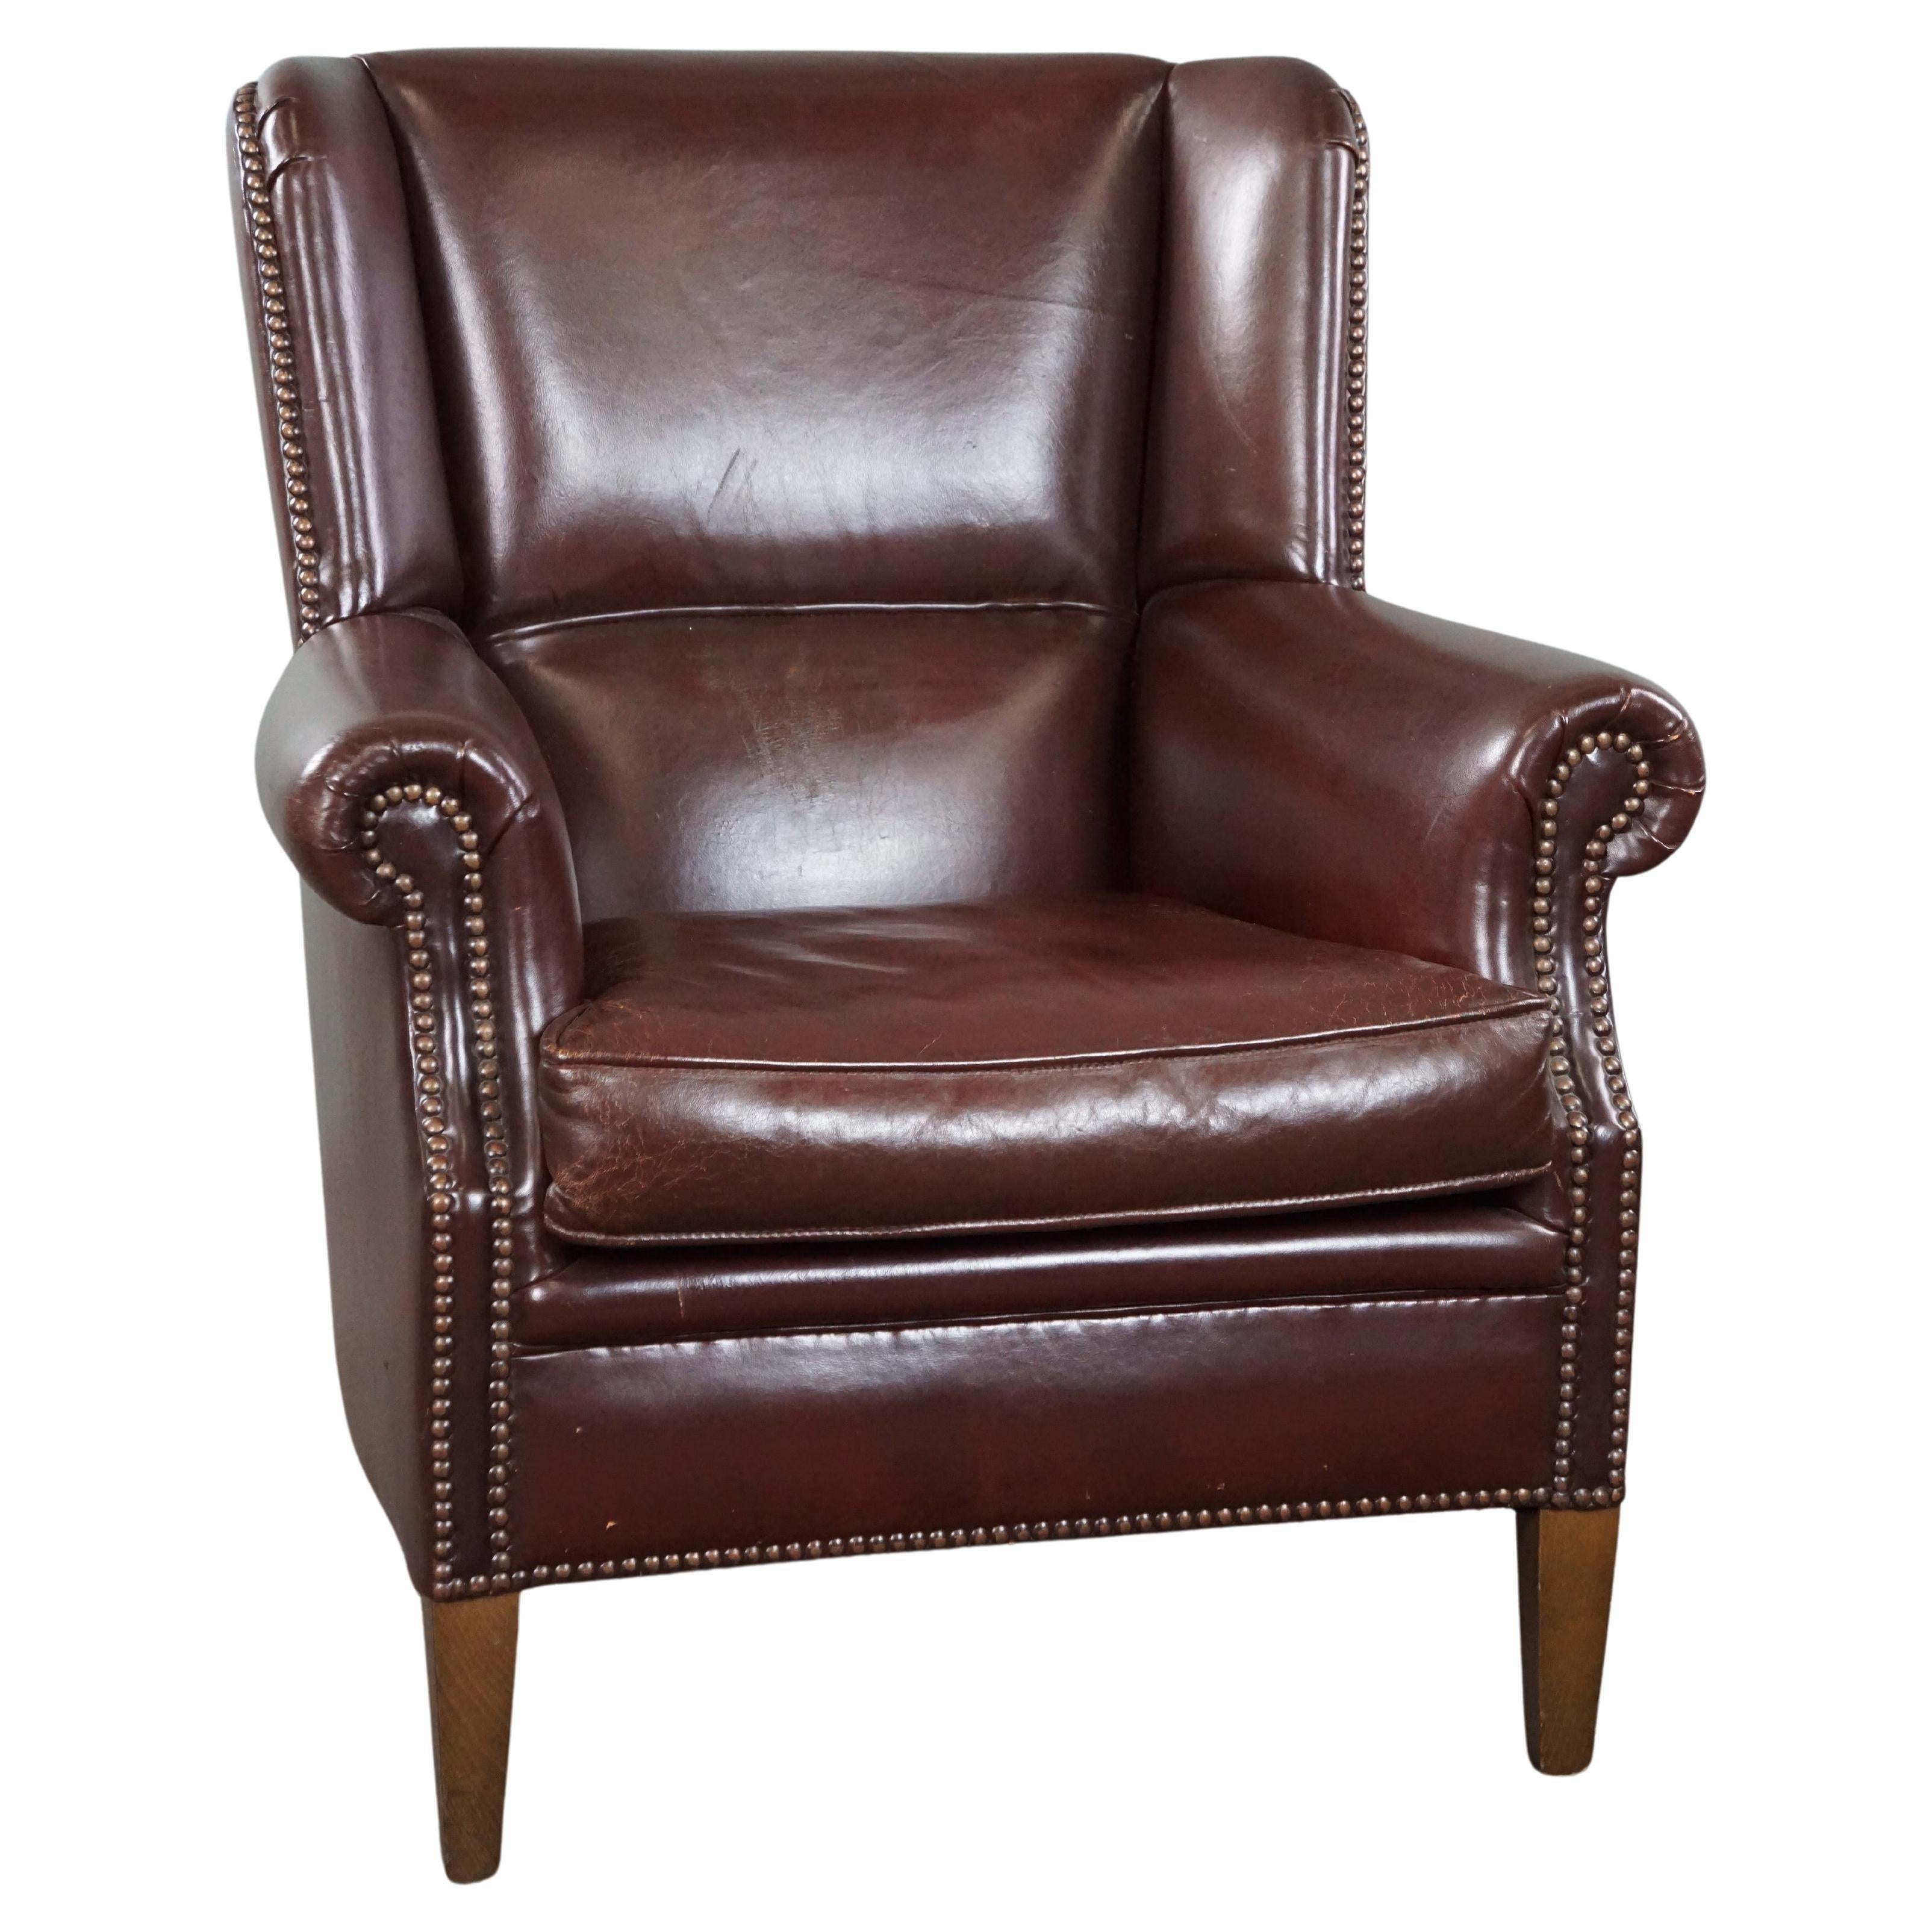 Comfortable sheep leather armchair in a beautiful warm color For Sale